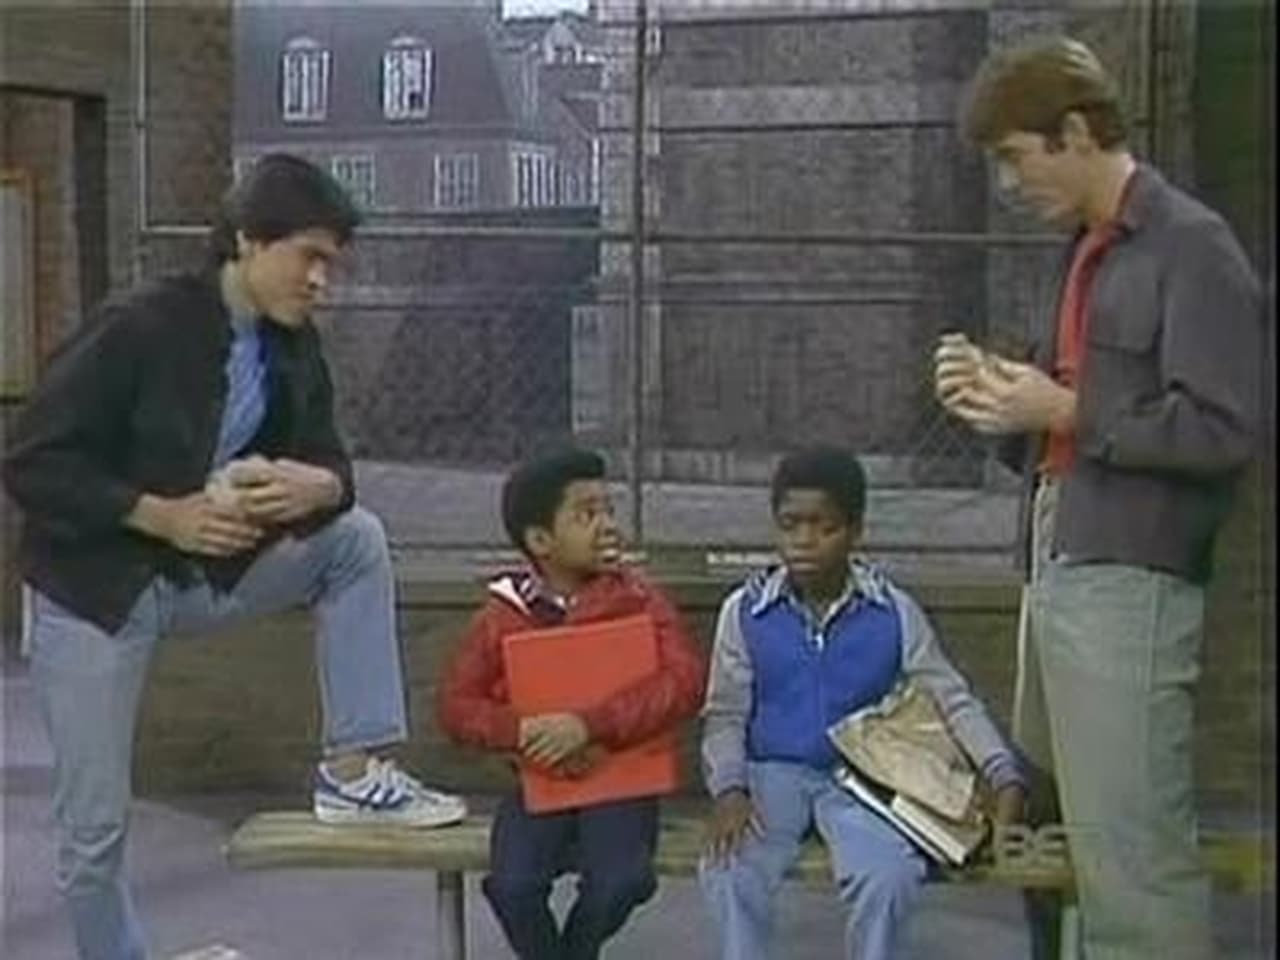 Diff'rent Strokes - Season 4 Episode 17 : Crime Story (Part 1) (a.k.a.) Crime in the Schools